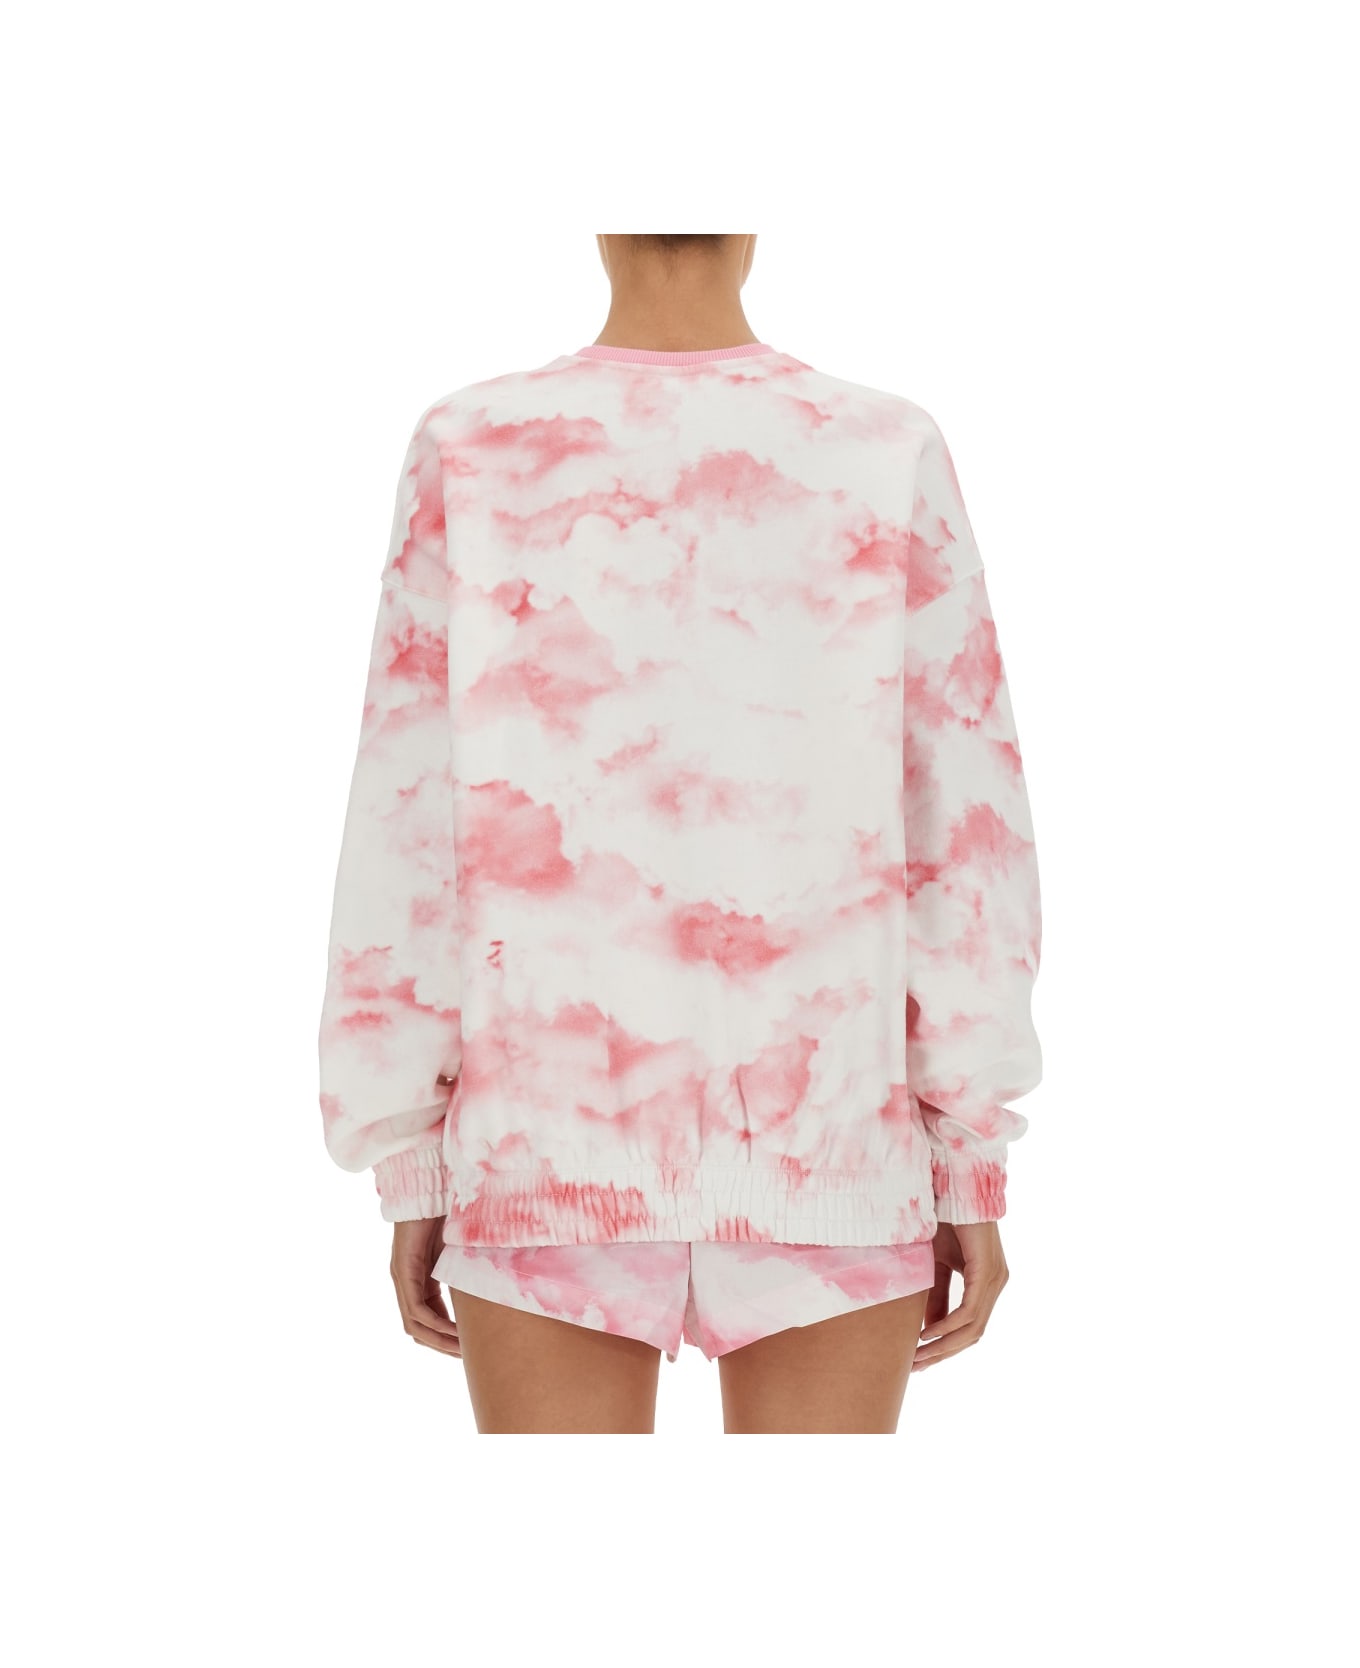 Rotate by Birger Christensen Sweatshirt With Logo Embroidery - PINK